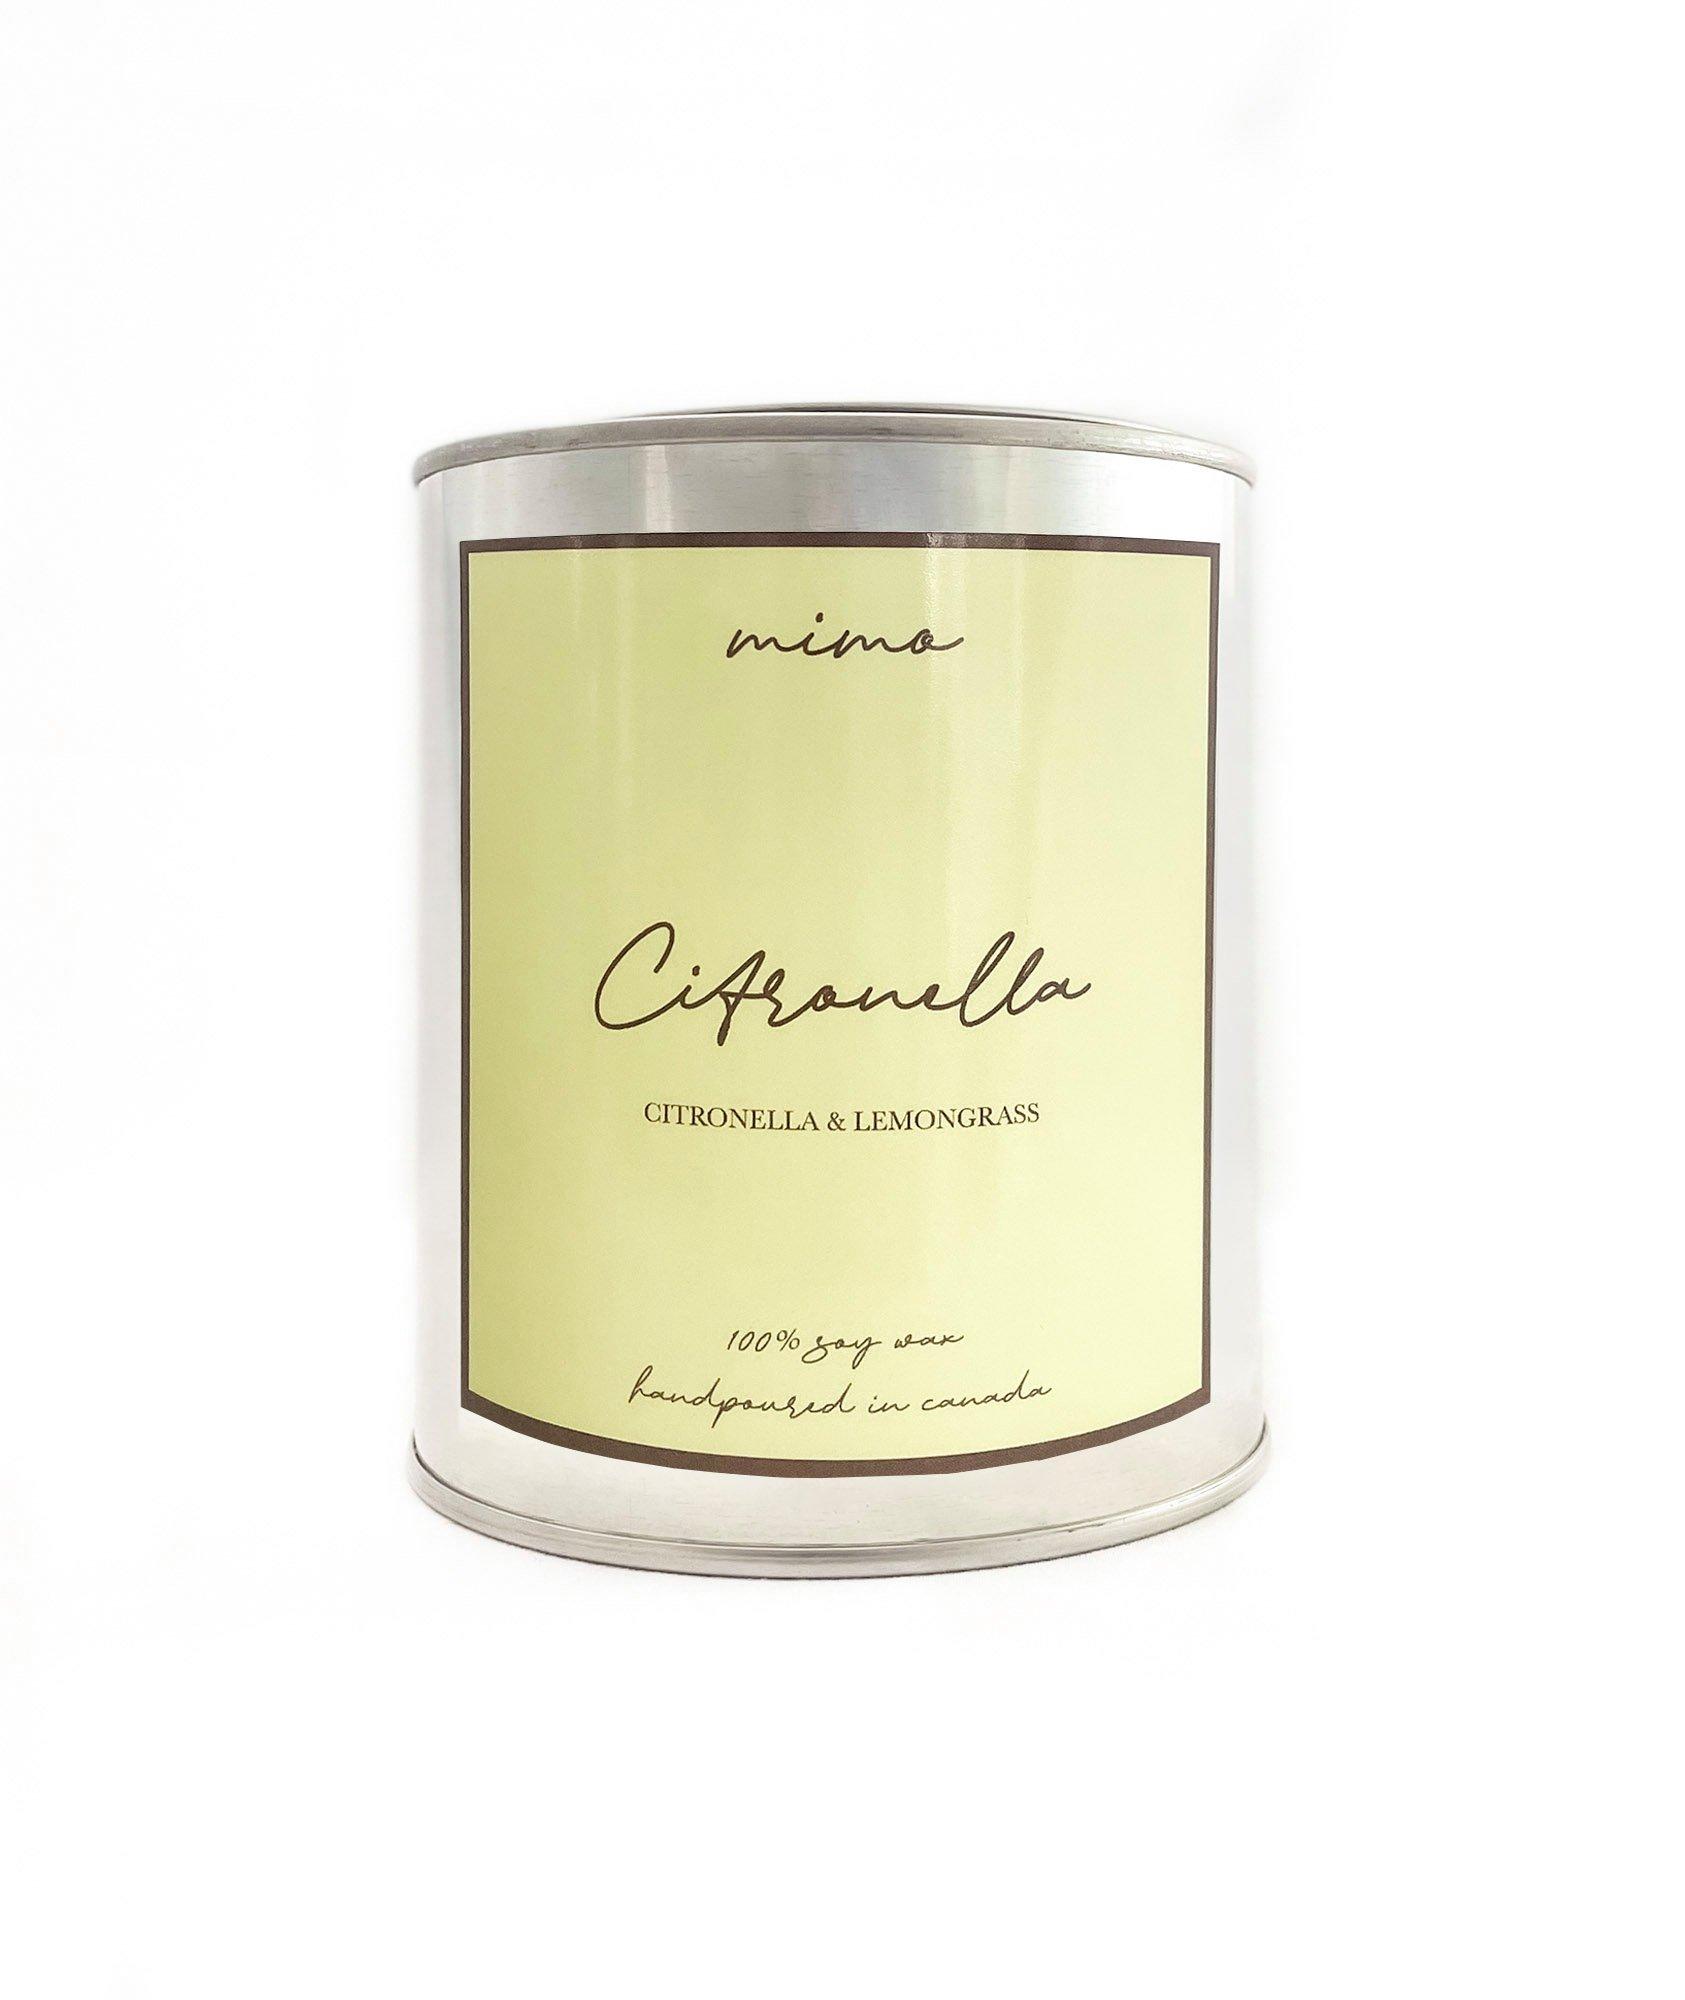 Citronella Lemongrass Bug Repellent Scented Candle image 0